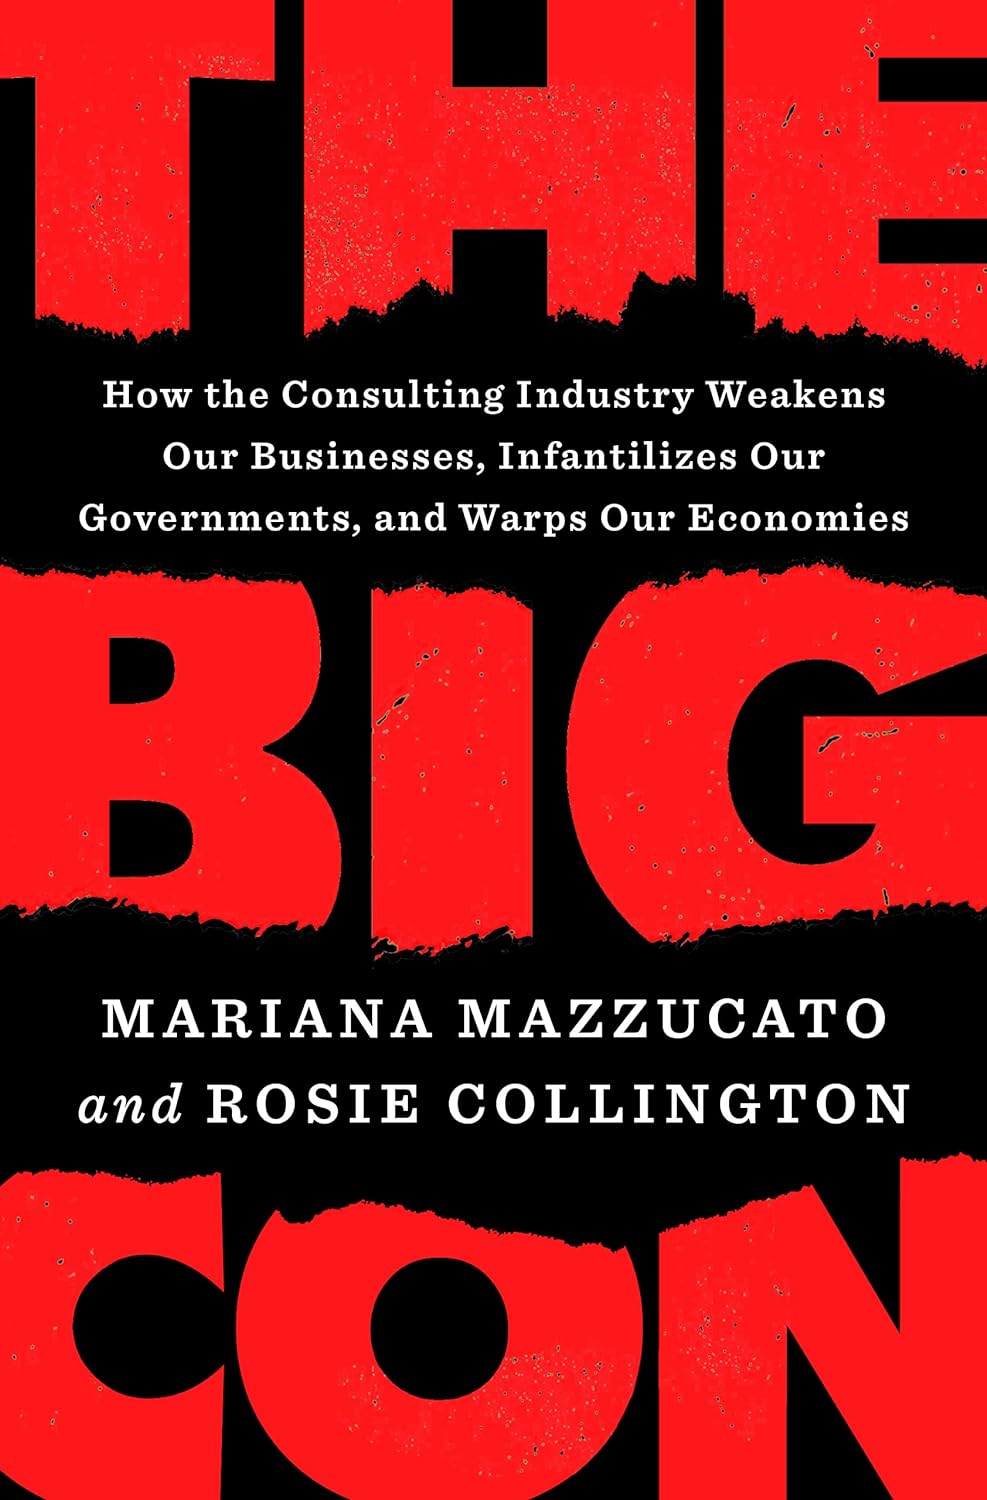 https://www.amazon.com/Big-Consulting-Businesses-Infantilizes-Governments-ebook/dp/B0B9JDBYFS